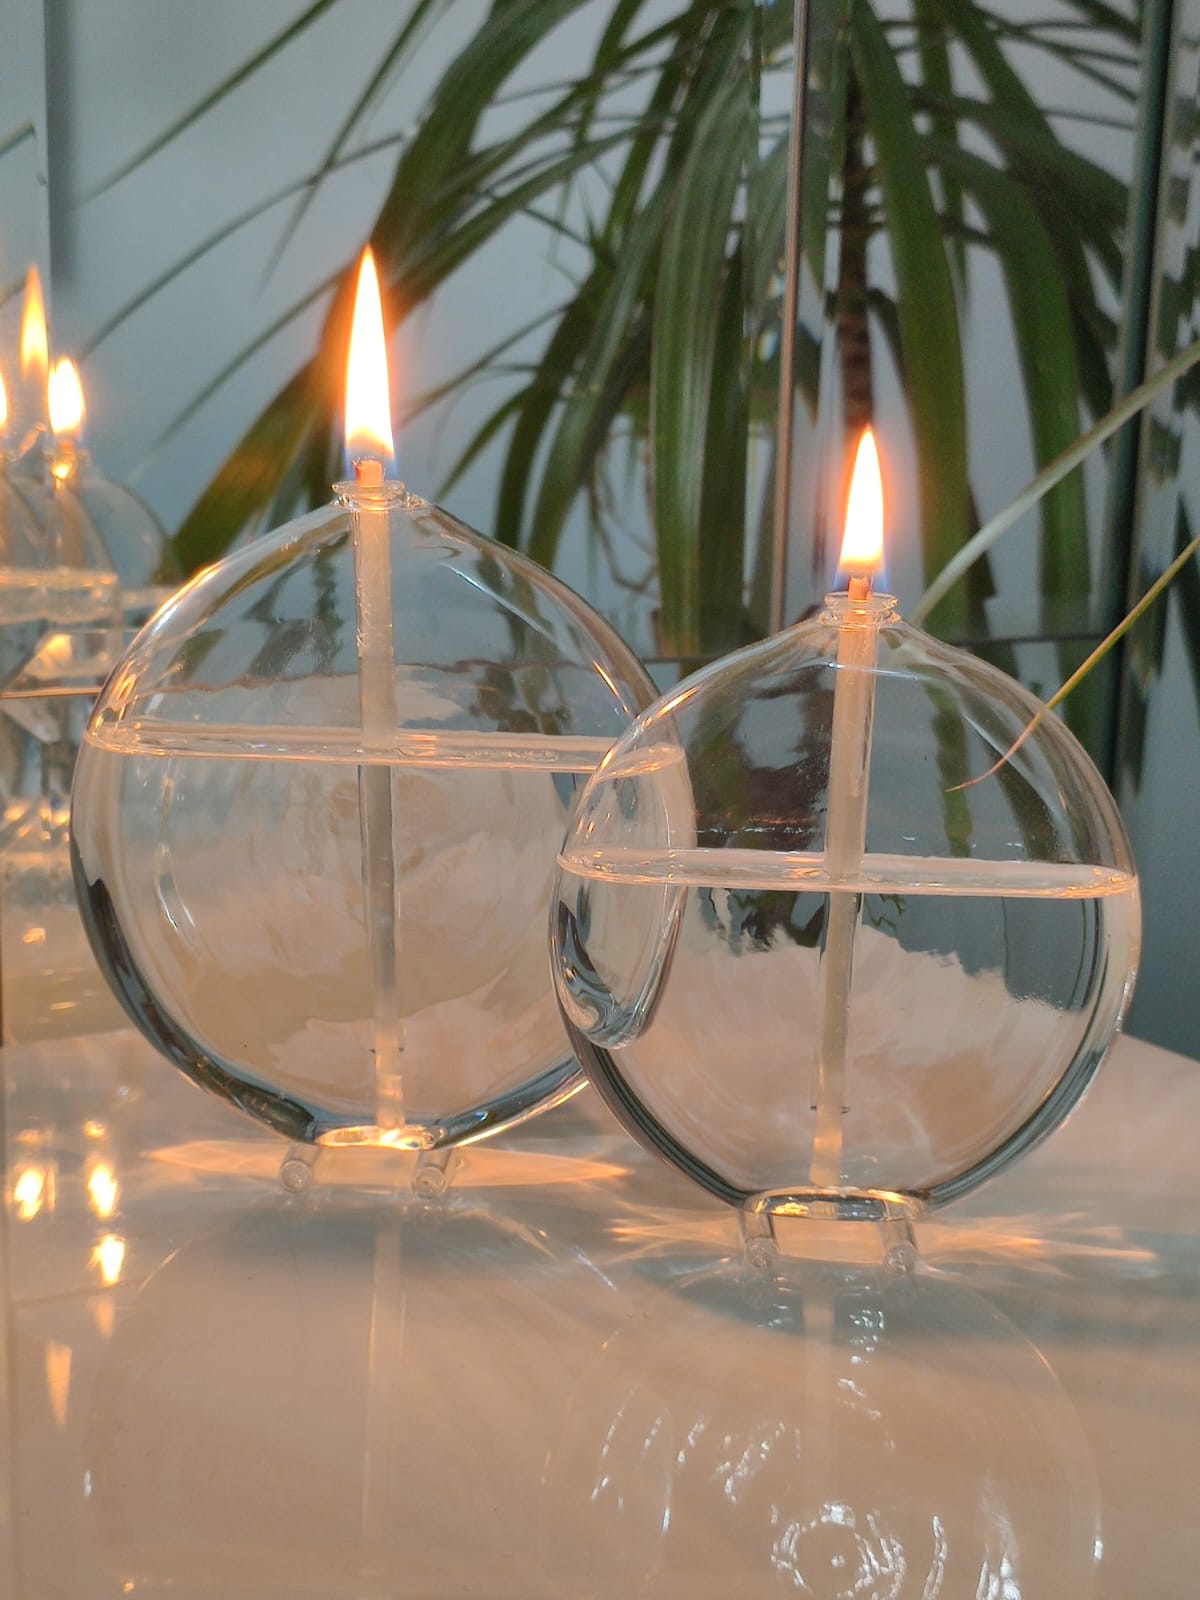 Quem Clear Handmade Big Balloon Glass Oil Candle, Home and Office